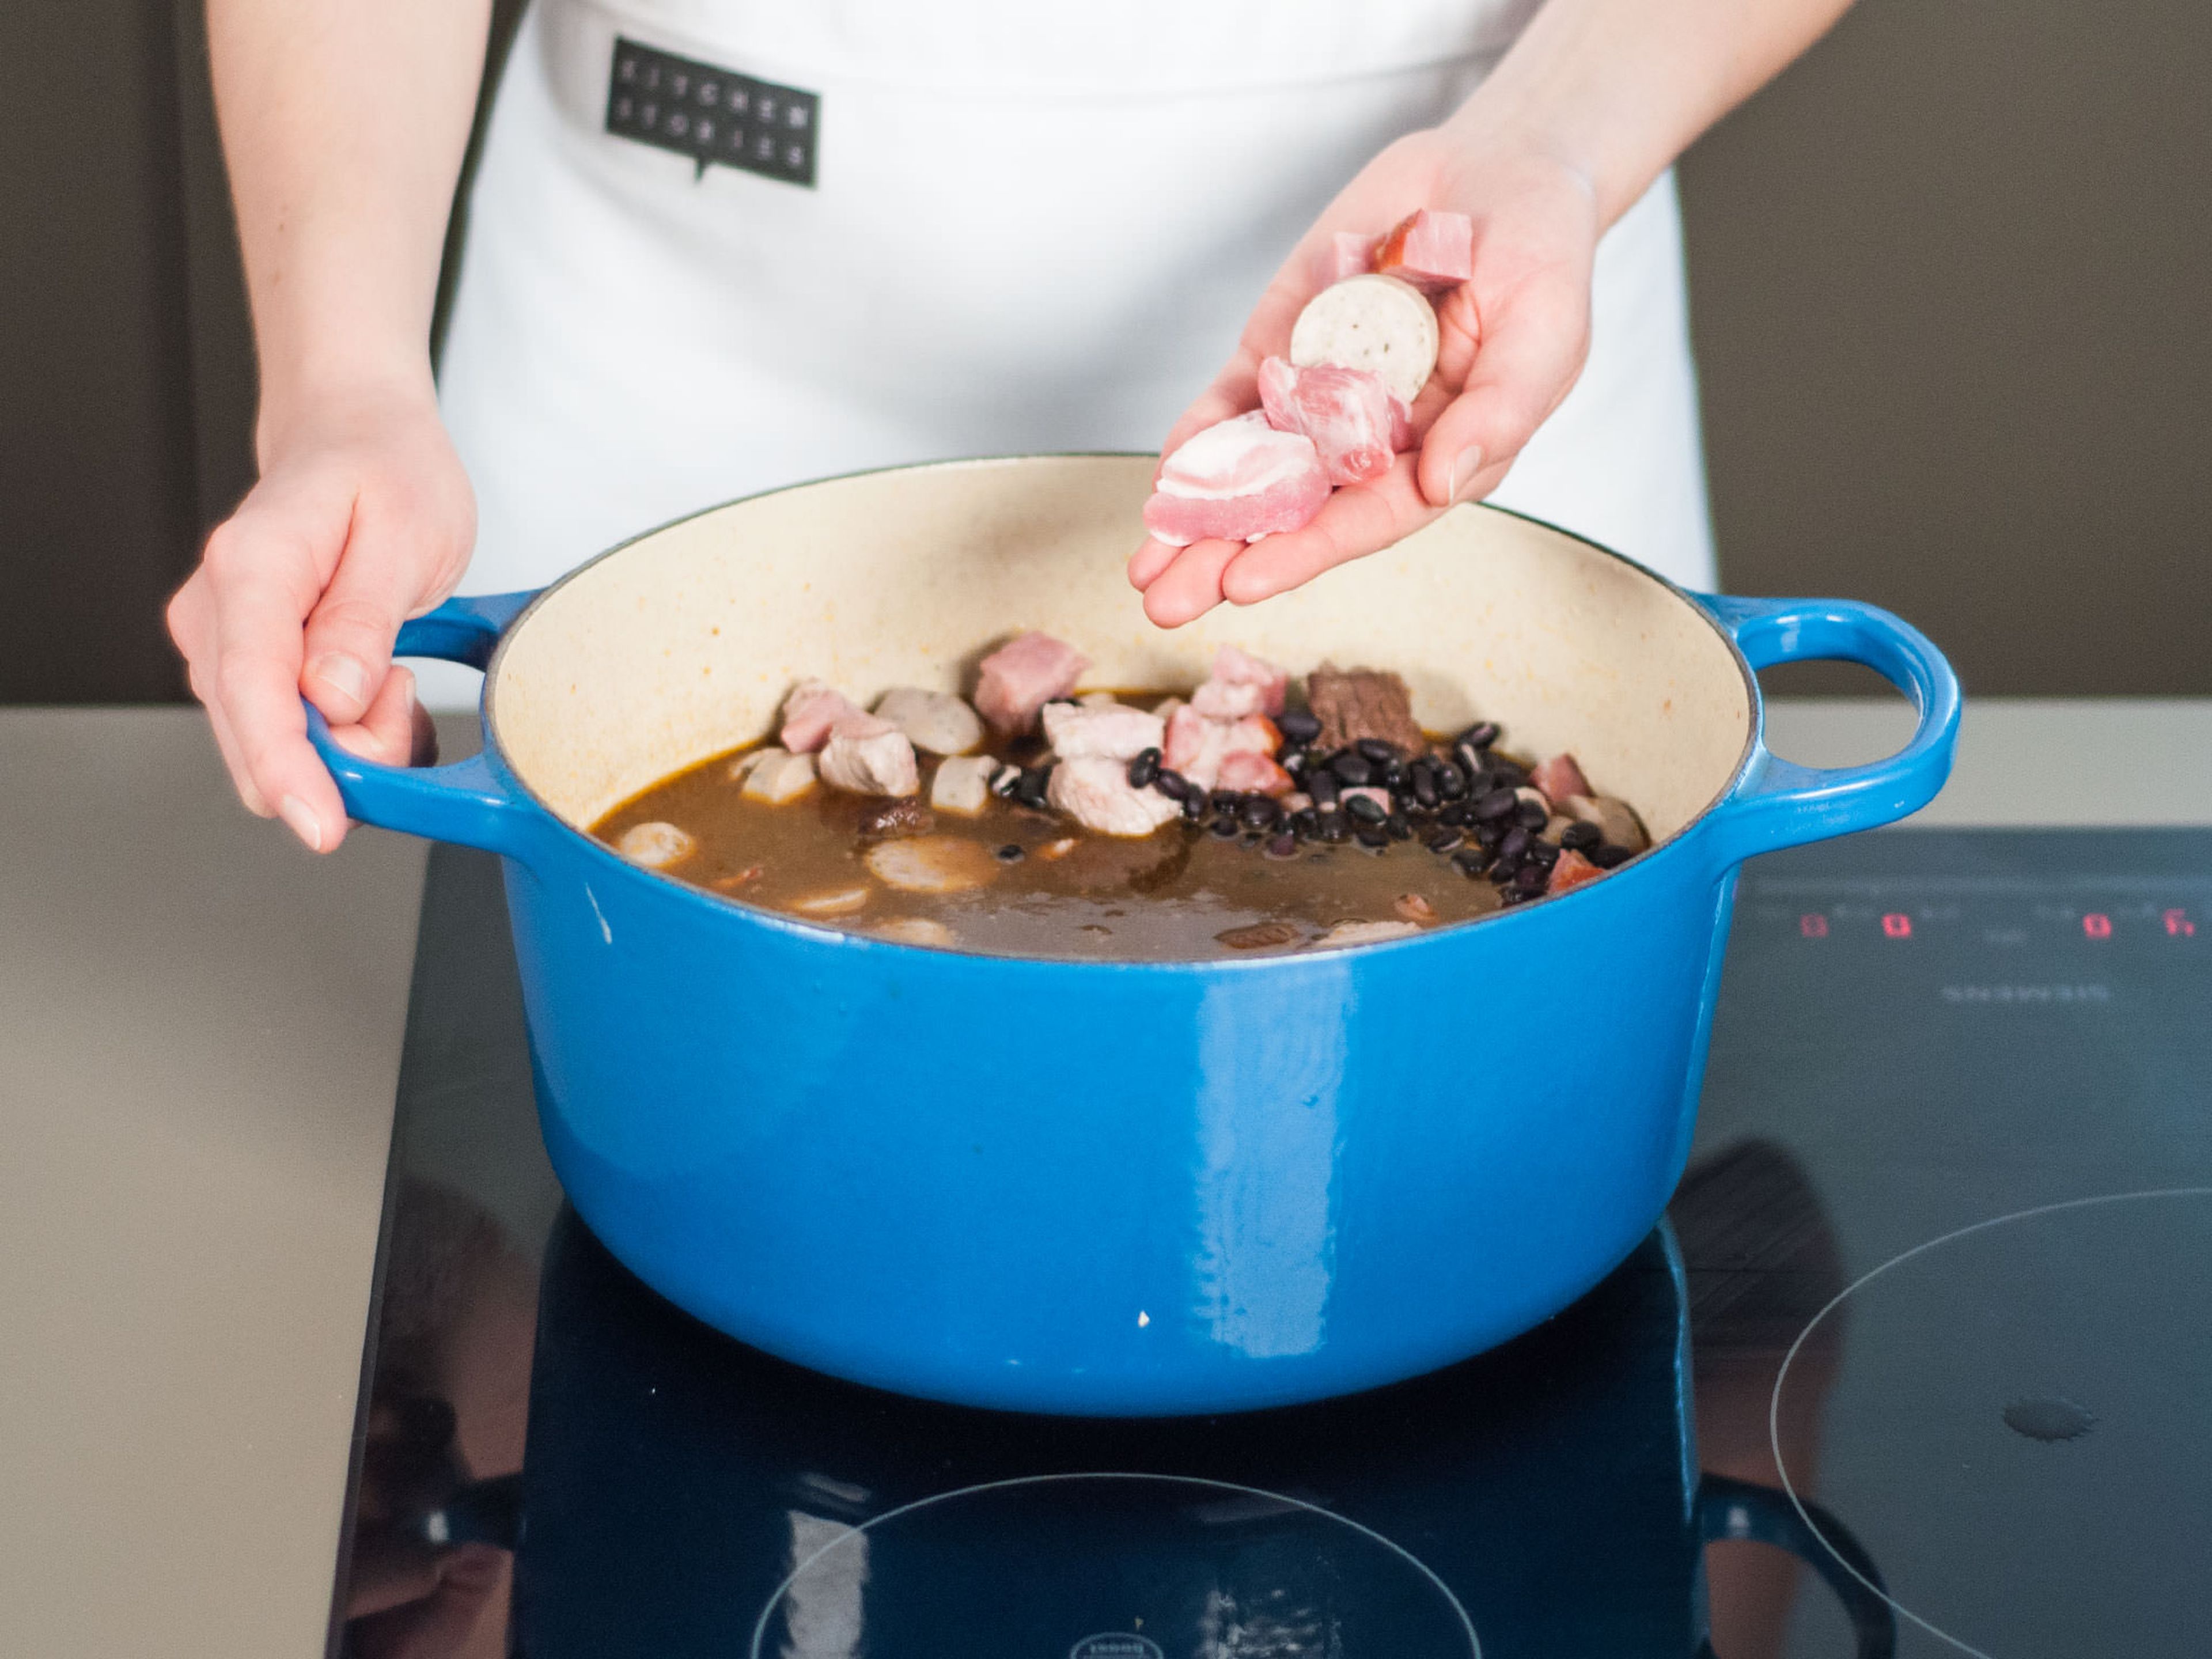 Add black beans, smoked pork chop, pork belly, and sausages. Continue to simmer over medium-low heat for approx. 45 – 60 min. until beans are cooked through and the sauce has slightly thickened.